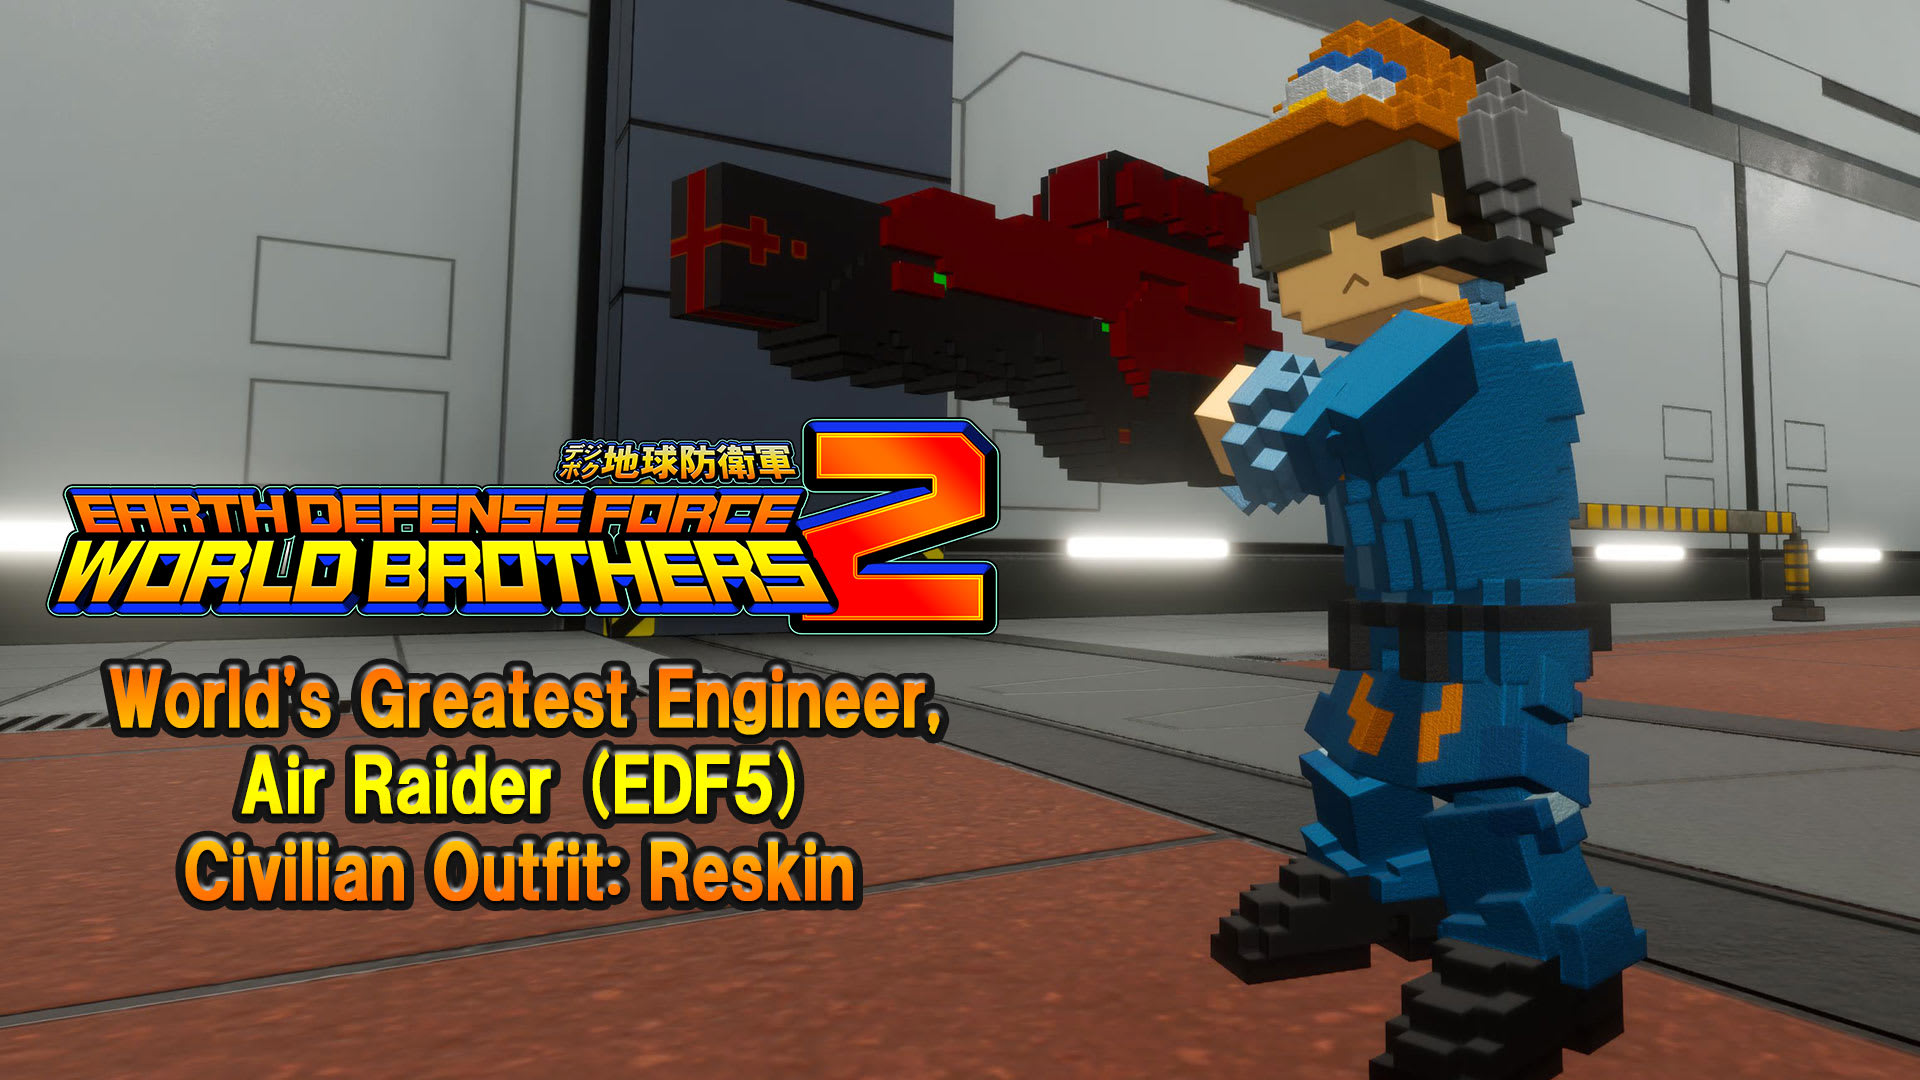 "Additional character" World's Greatest Engineer, Air Raider (EDF5) Civilian Outfit: Reskin 1